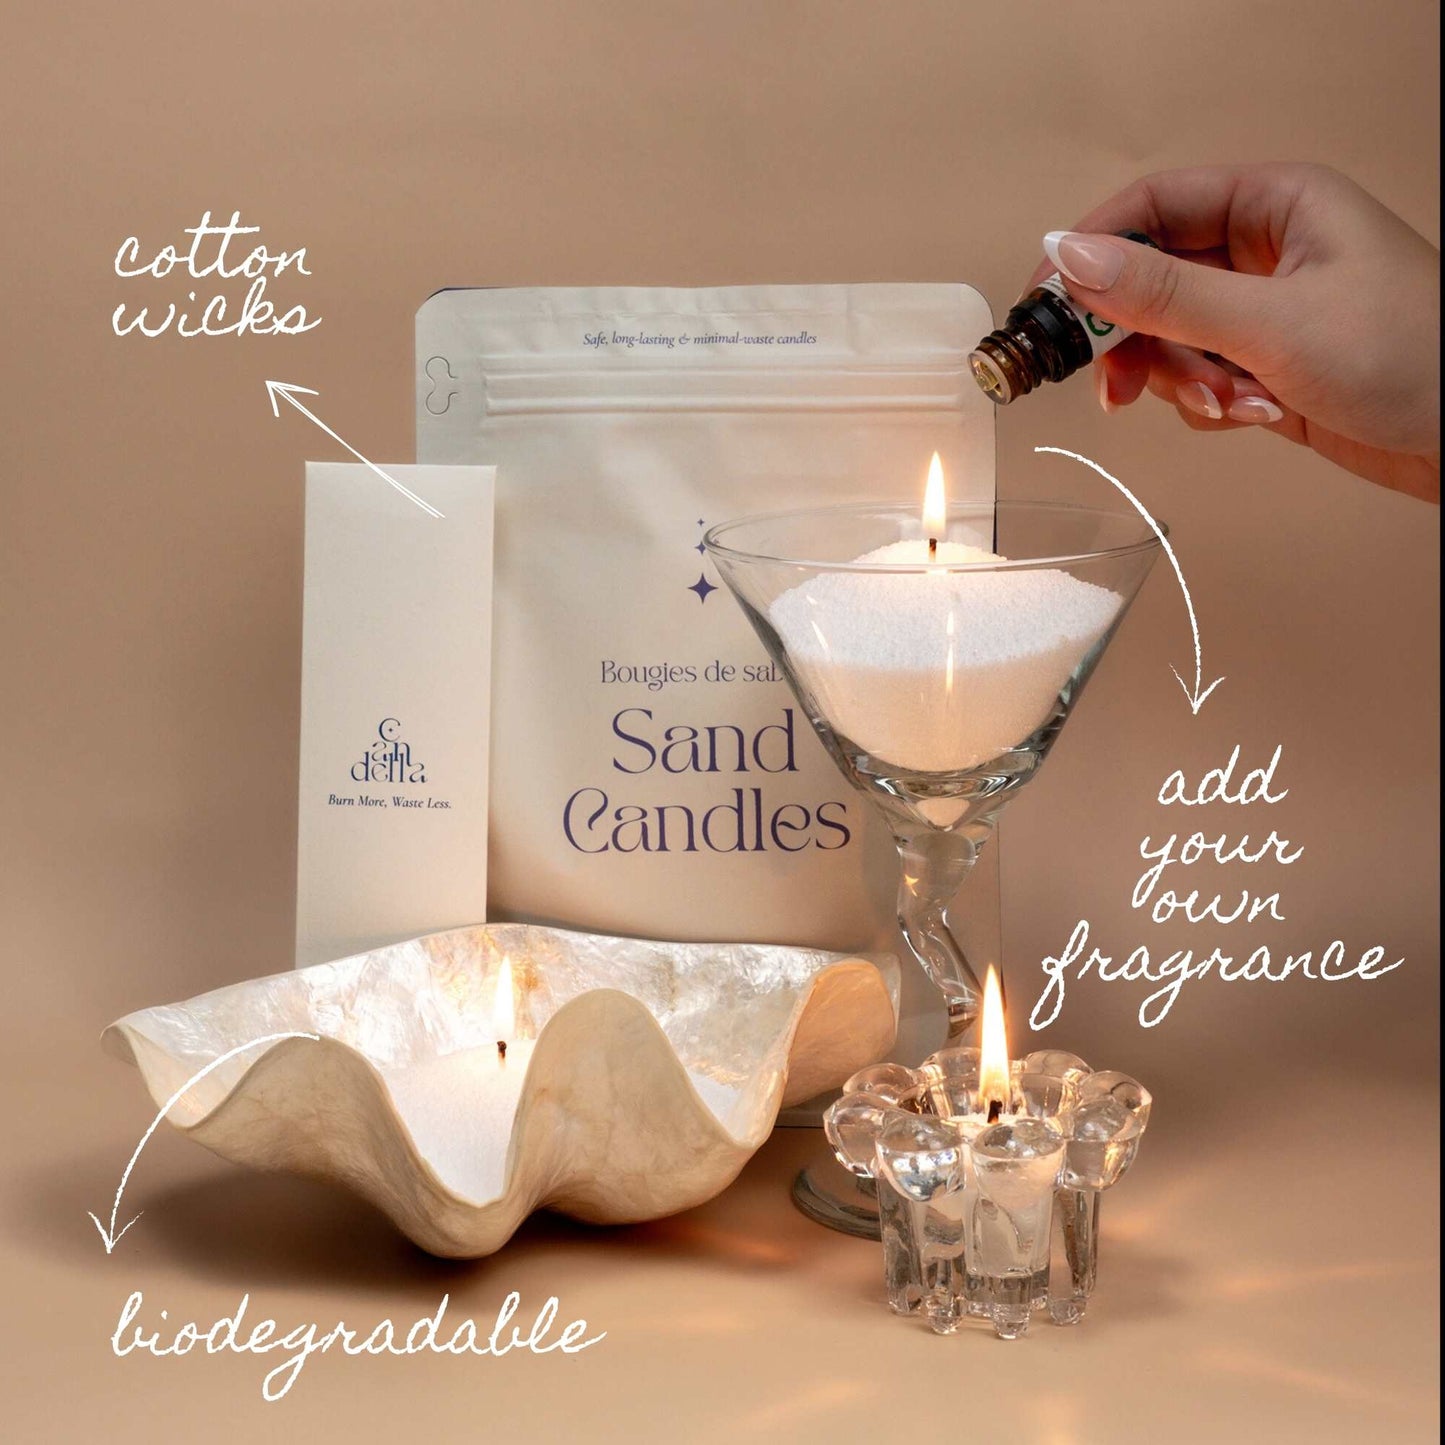 Sand candles packaging and candle lighting, with the option to customize scents by adding your own fragrance oil